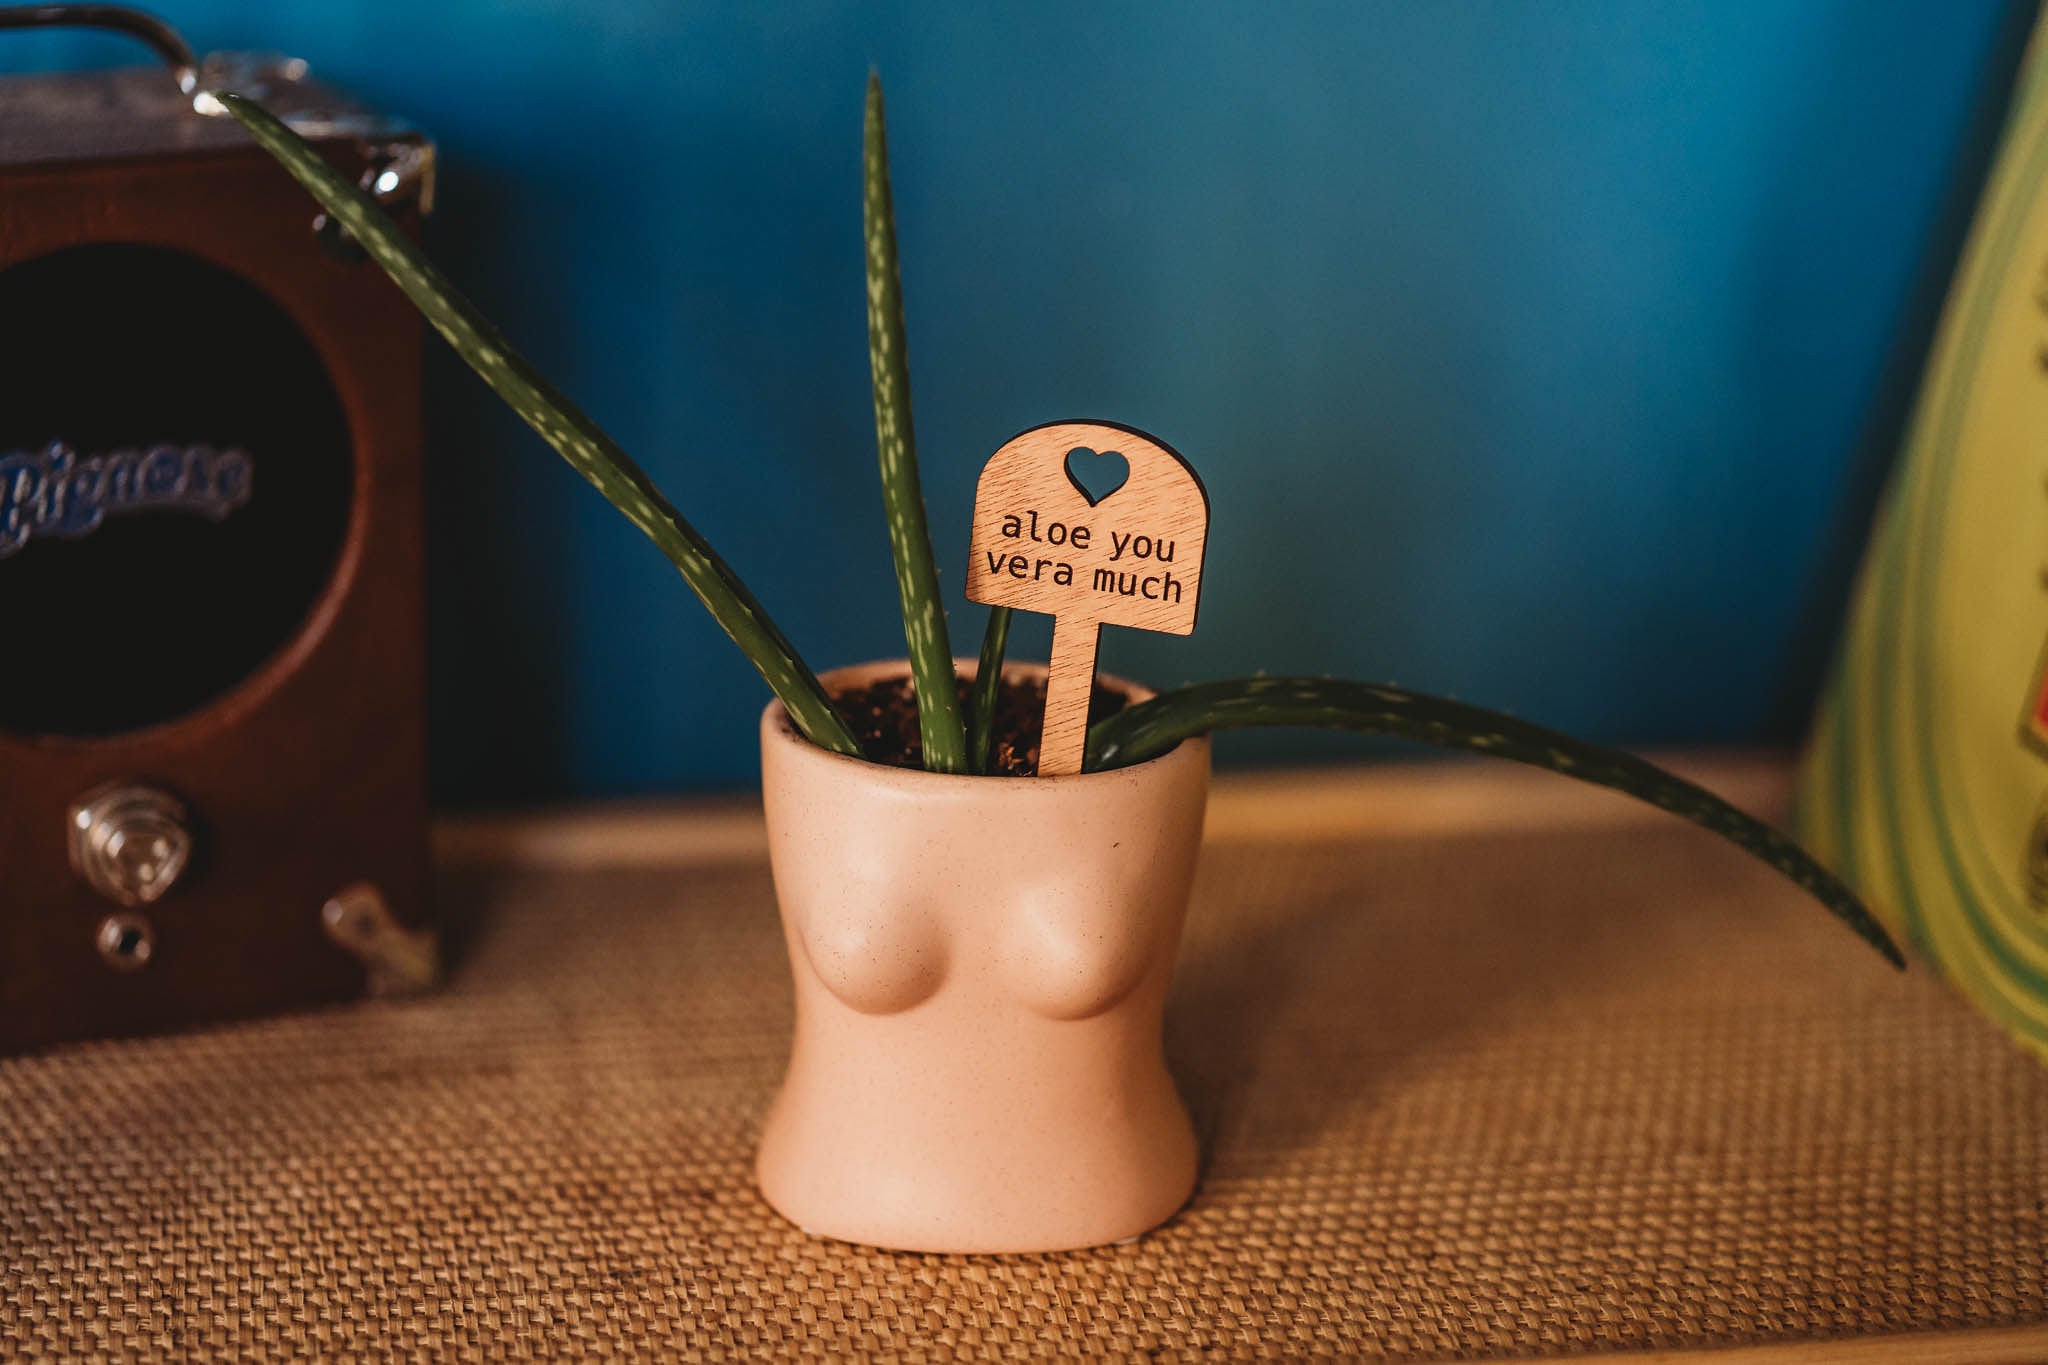 Aloe plant with green spiky leaves housed in a beige ceramic boob pot on a woven surface, accompanied by a wooden marker inscribed with 'aloe you vera much' against a deep blue background.